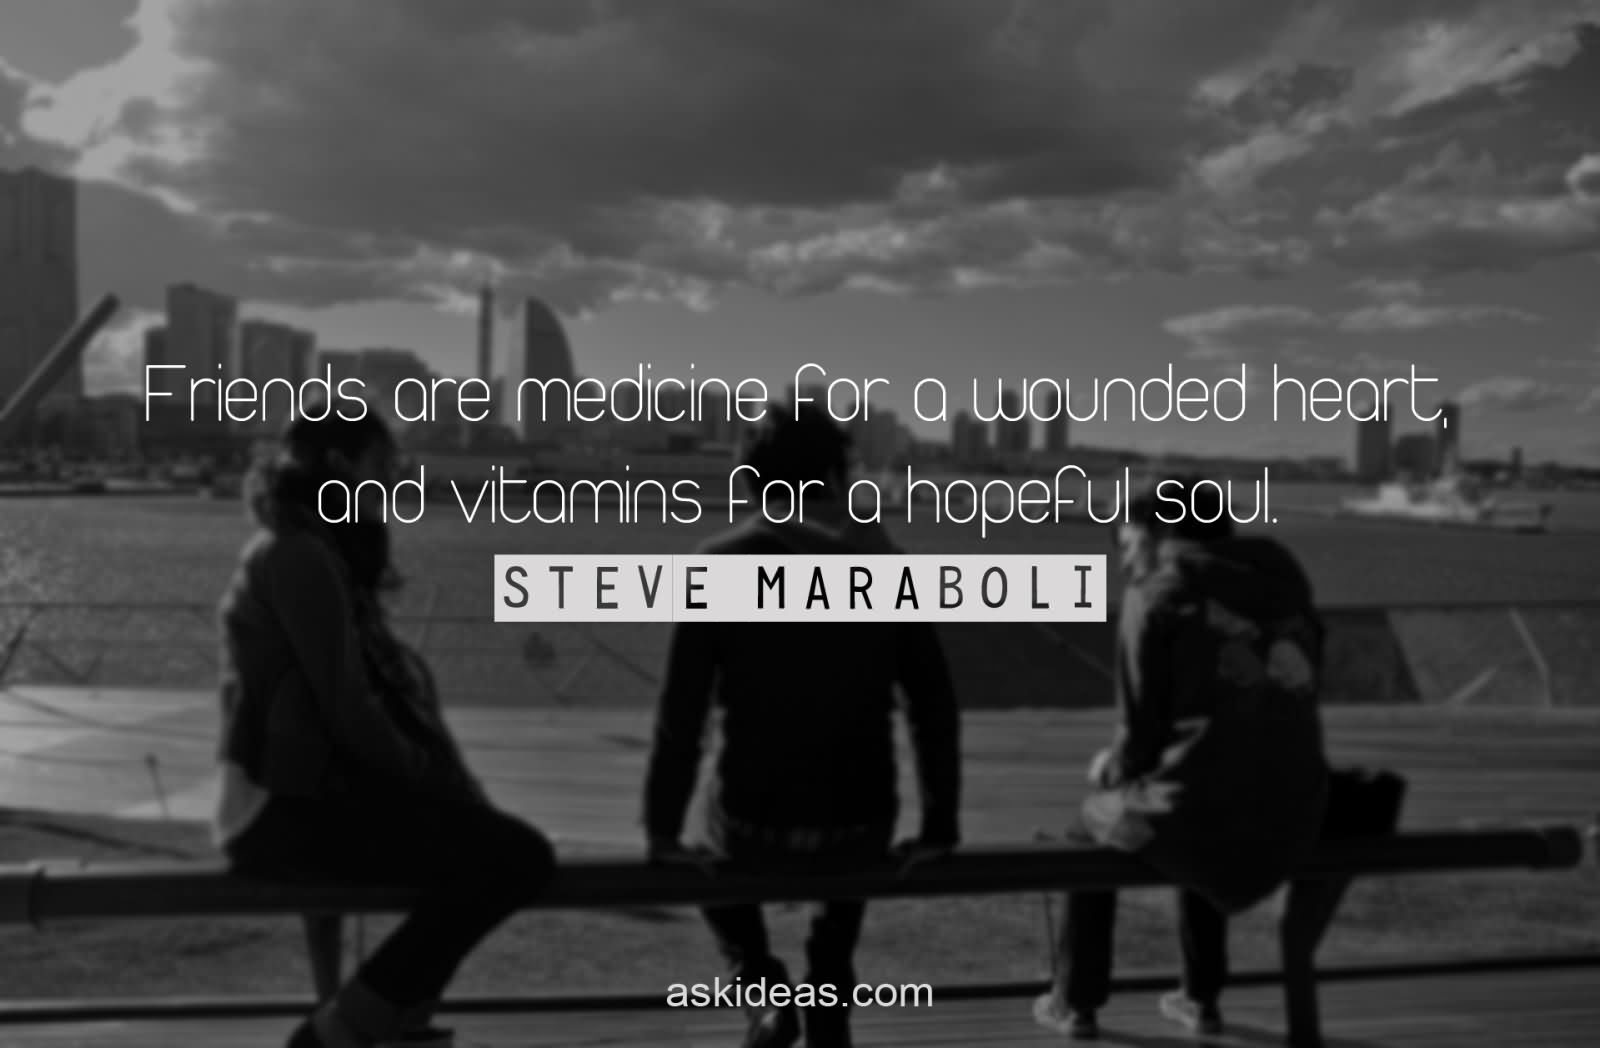 Friends are medicine for a wounded heart, and vitamins for a hopeful soul.